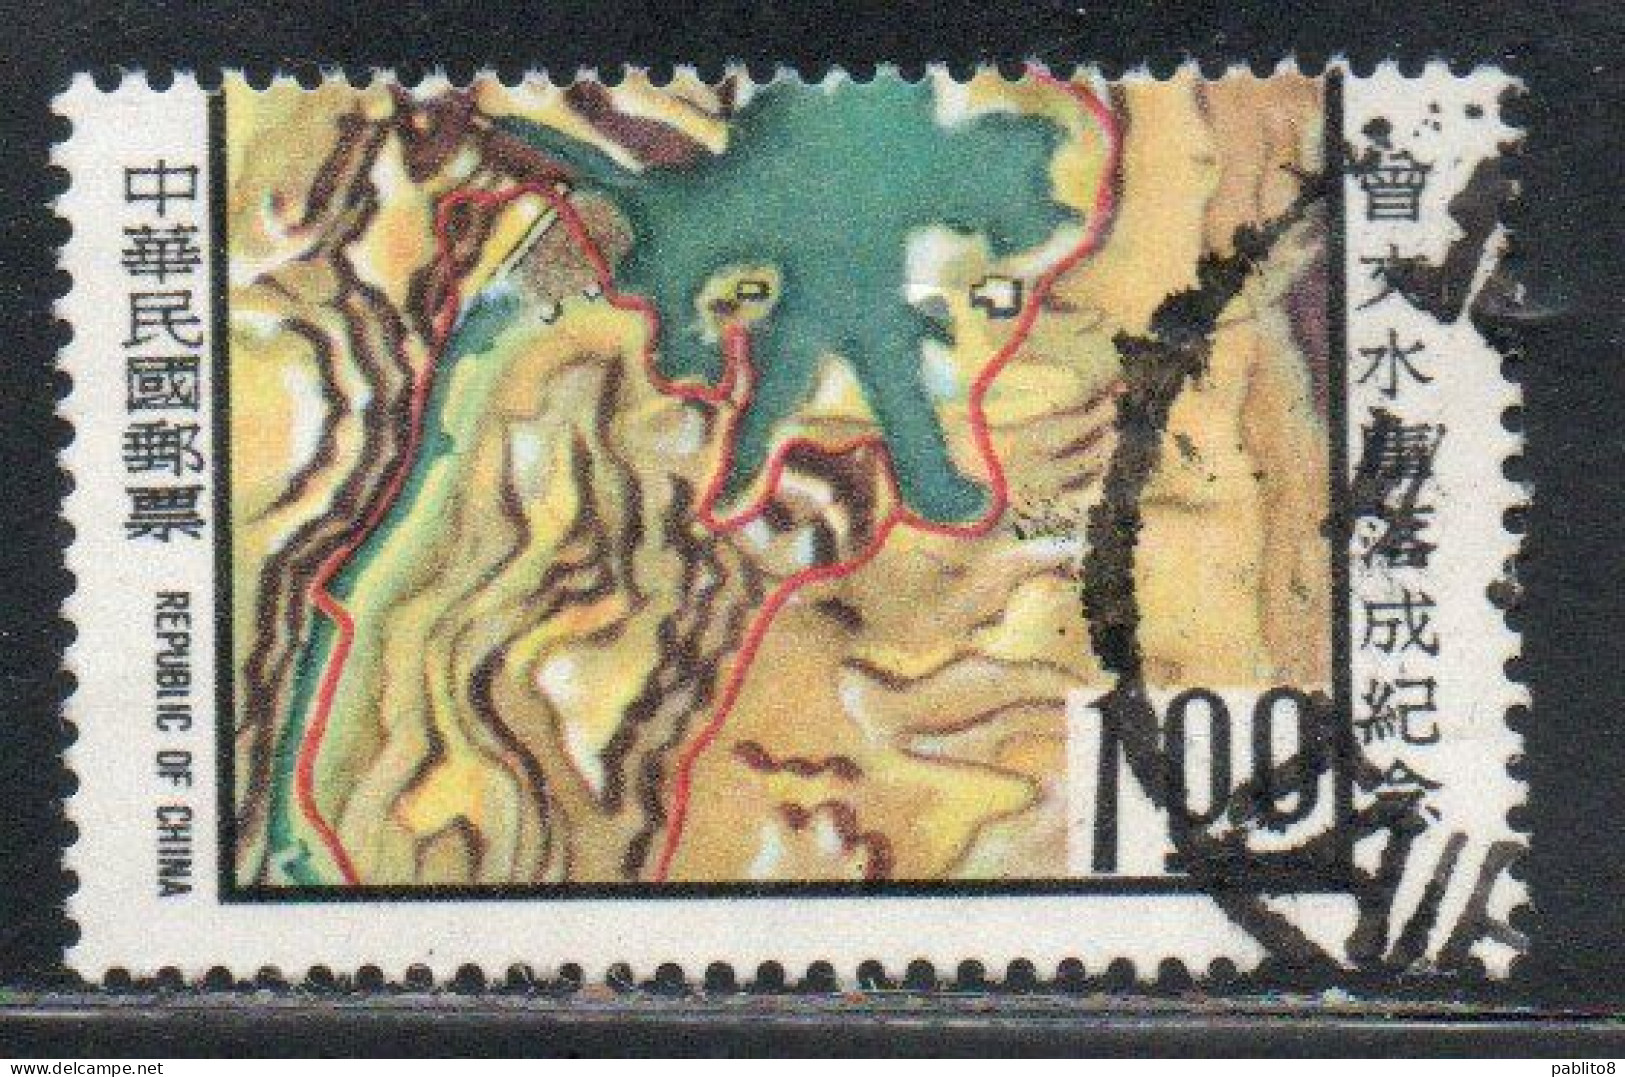 CHINA REPUBLIC CINA TAIWAN FORMOSA 1973 TSENGWEN RESERVOIR 1$ USED USATO OBLITERE' - Used Stamps